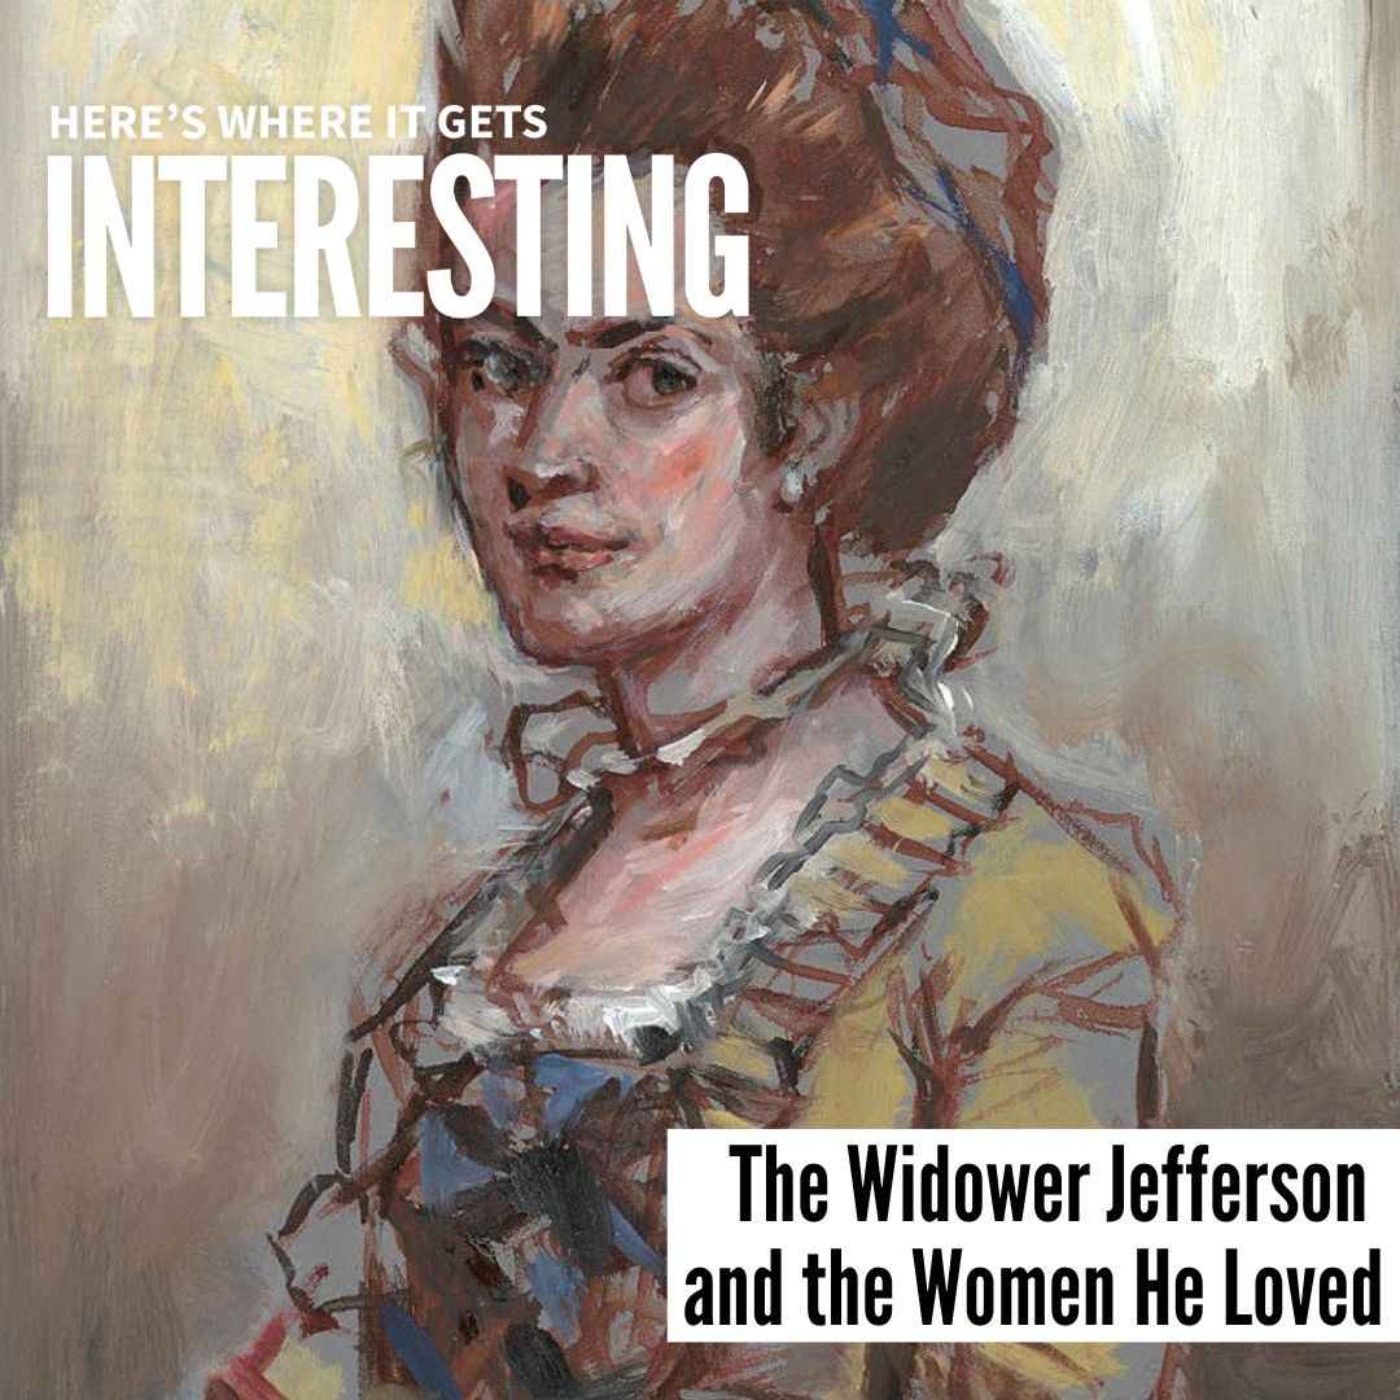 The Widower Jefferson and the Women He Loved